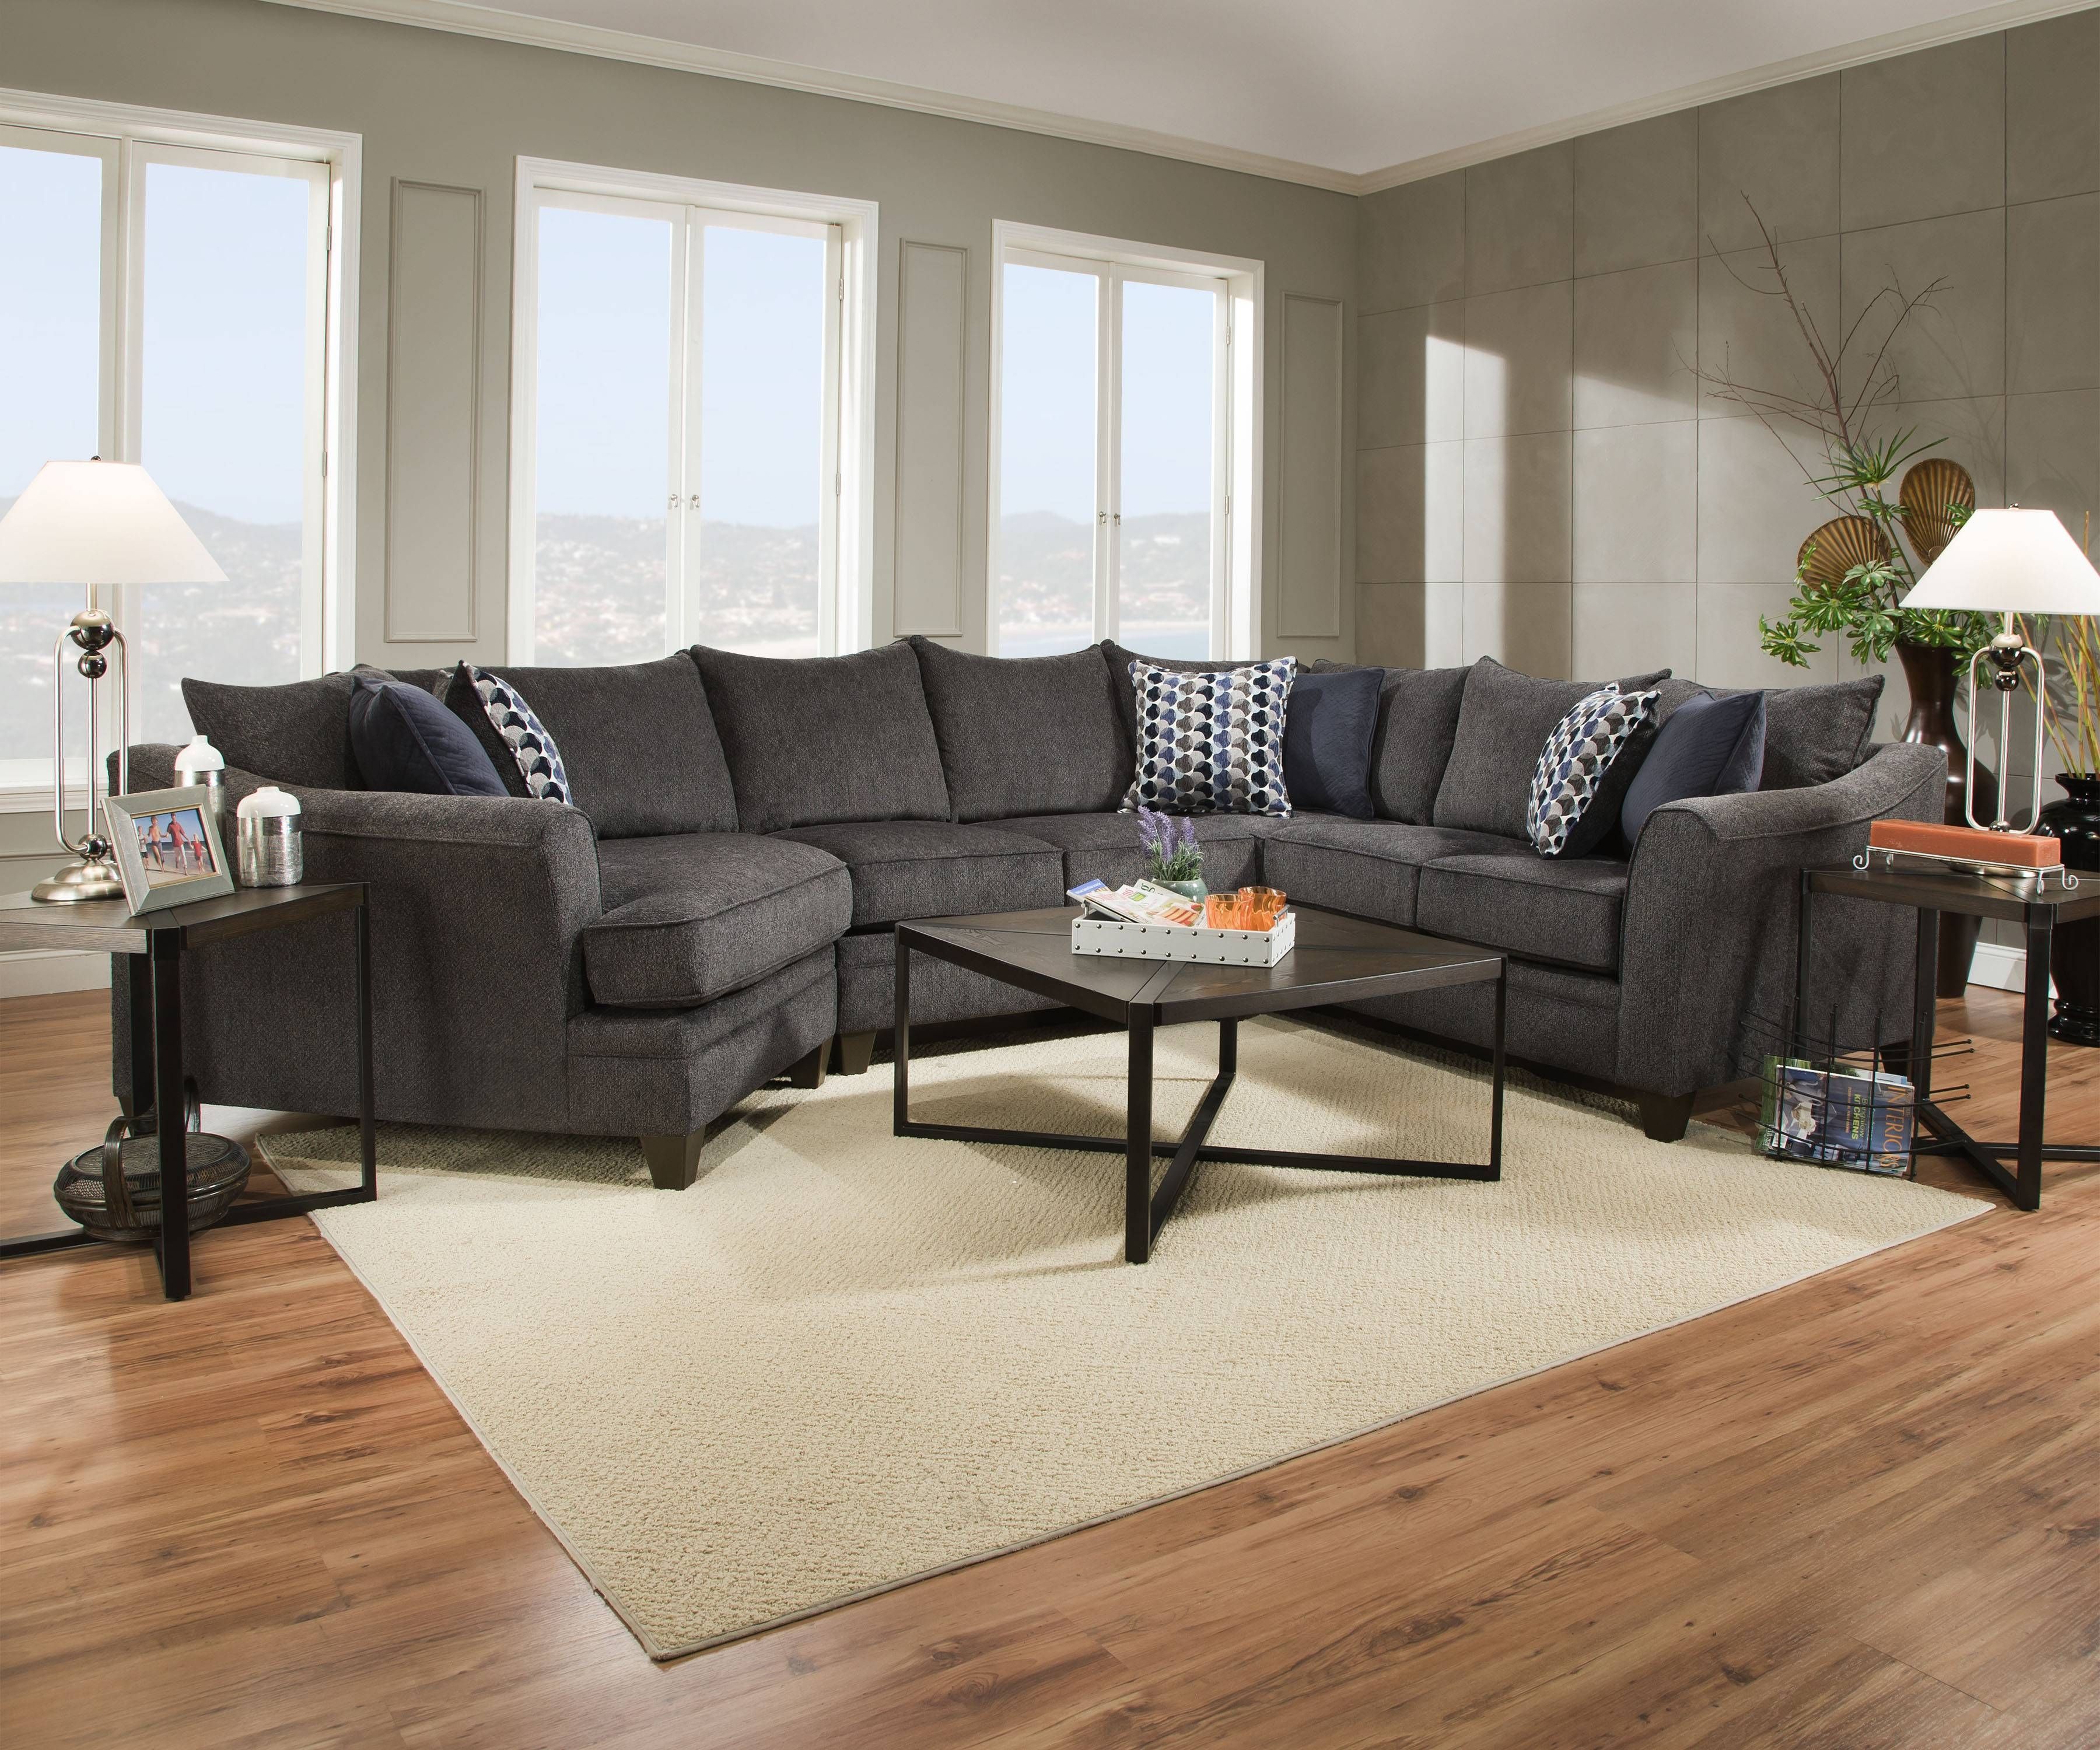 Furniture: Simmons Sectional For Comfortable Seating — Threestems Throughout Simmons Sectional Sofas (View 4 of 30)